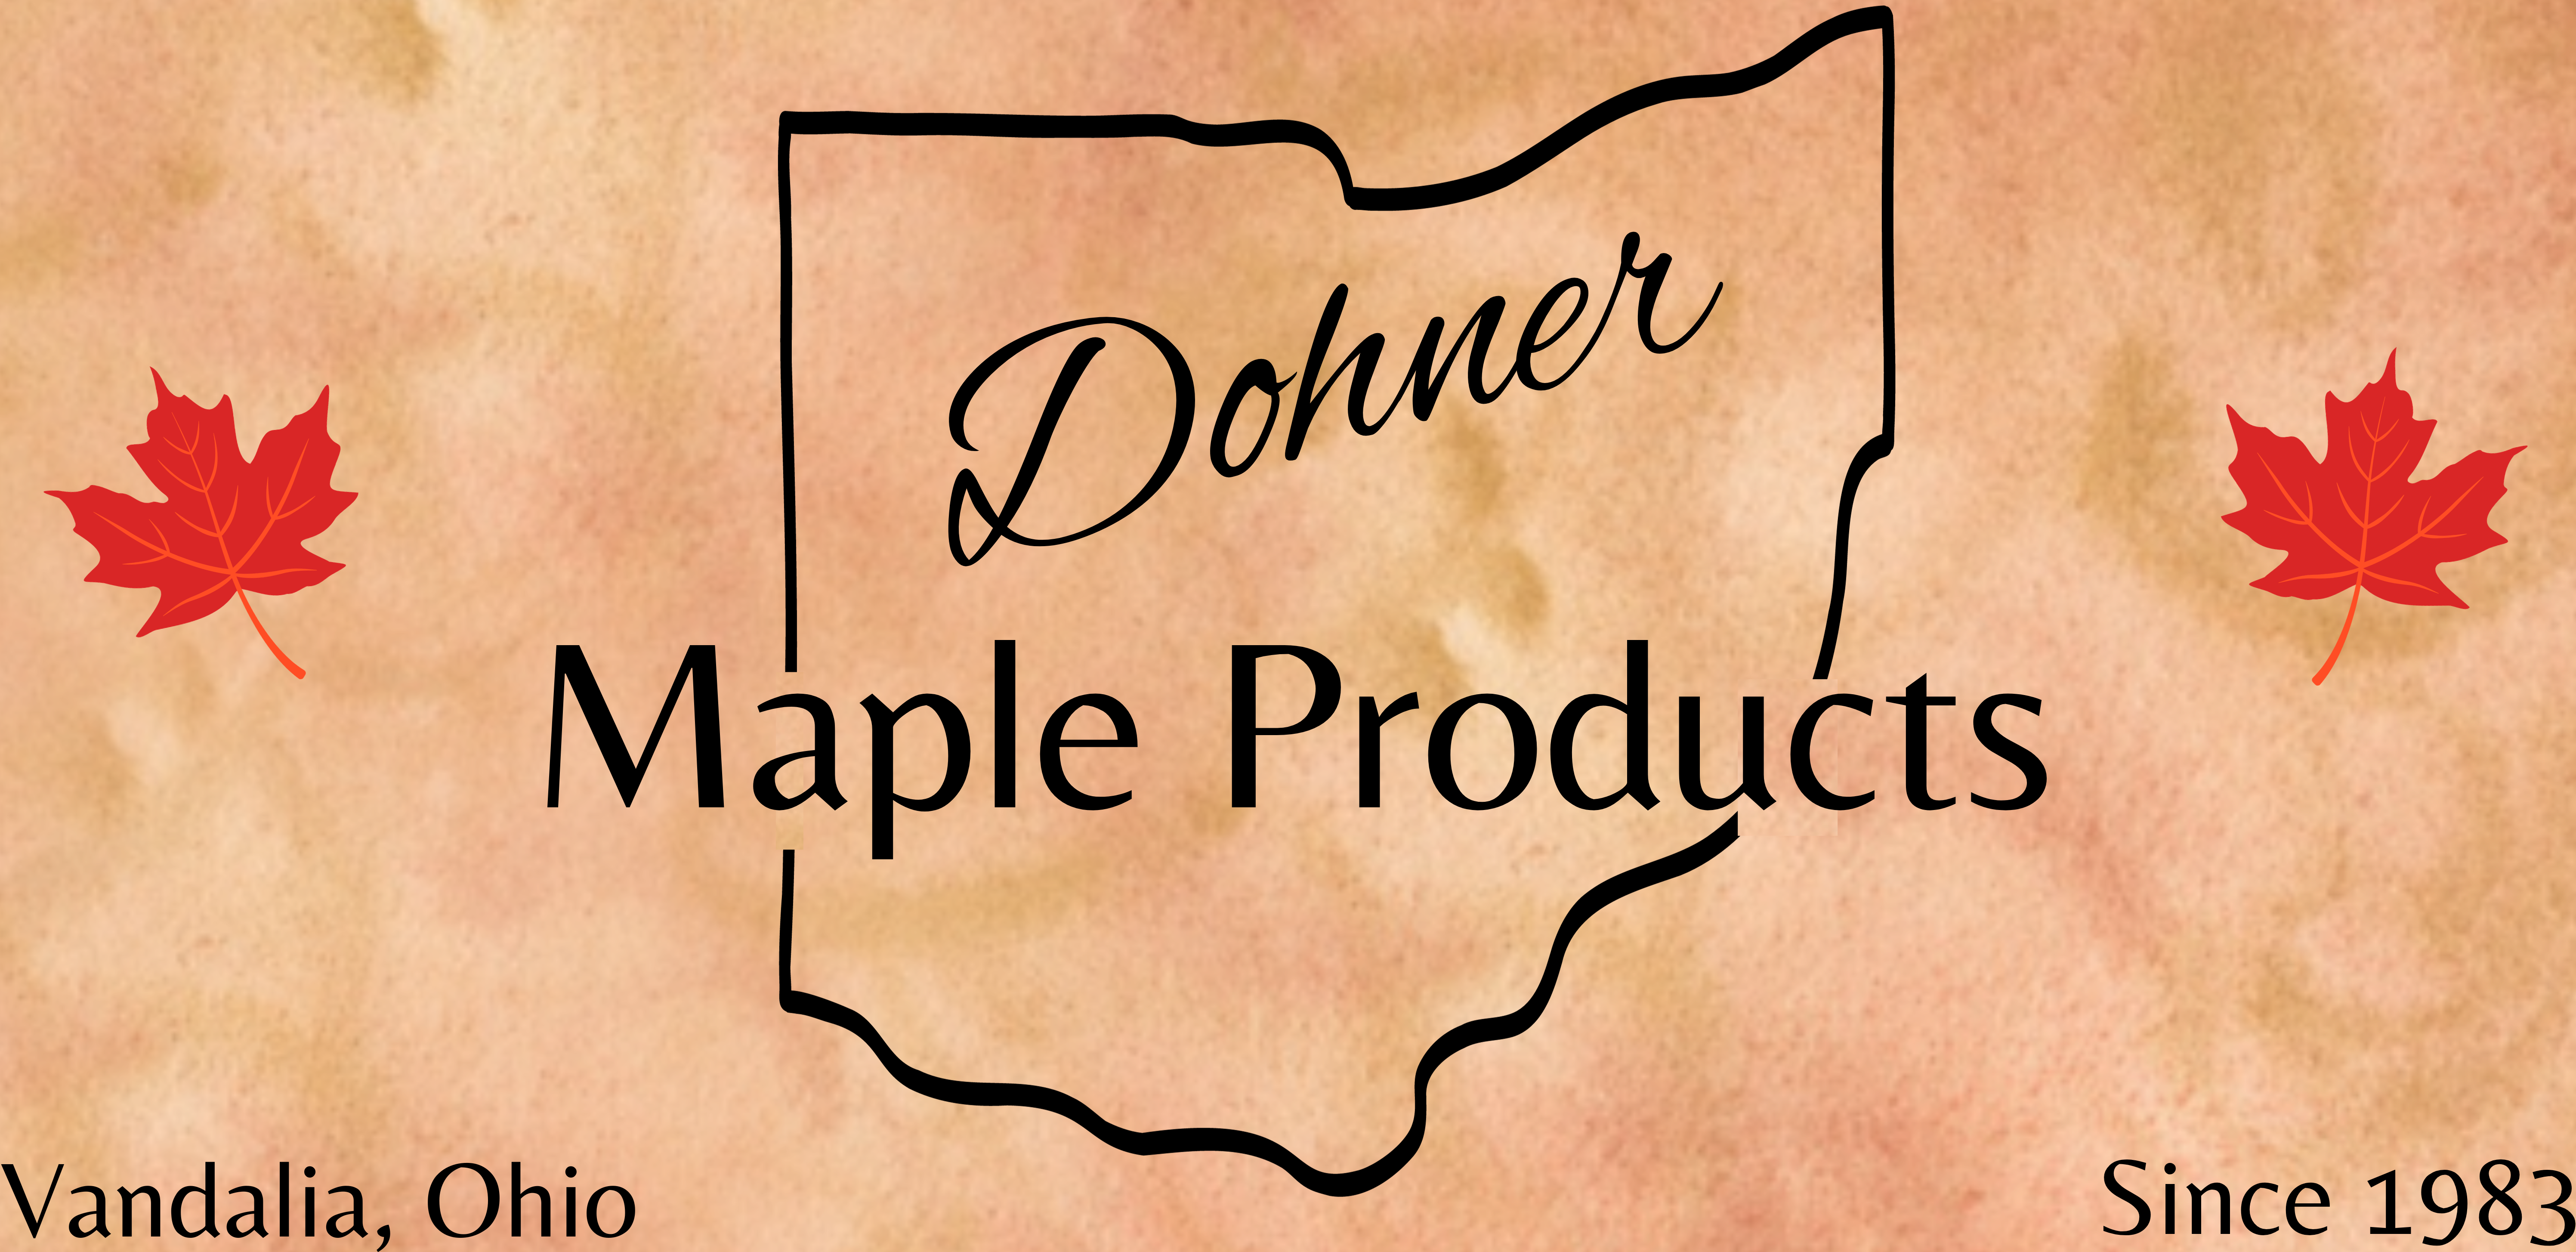 Dohner Maple Products